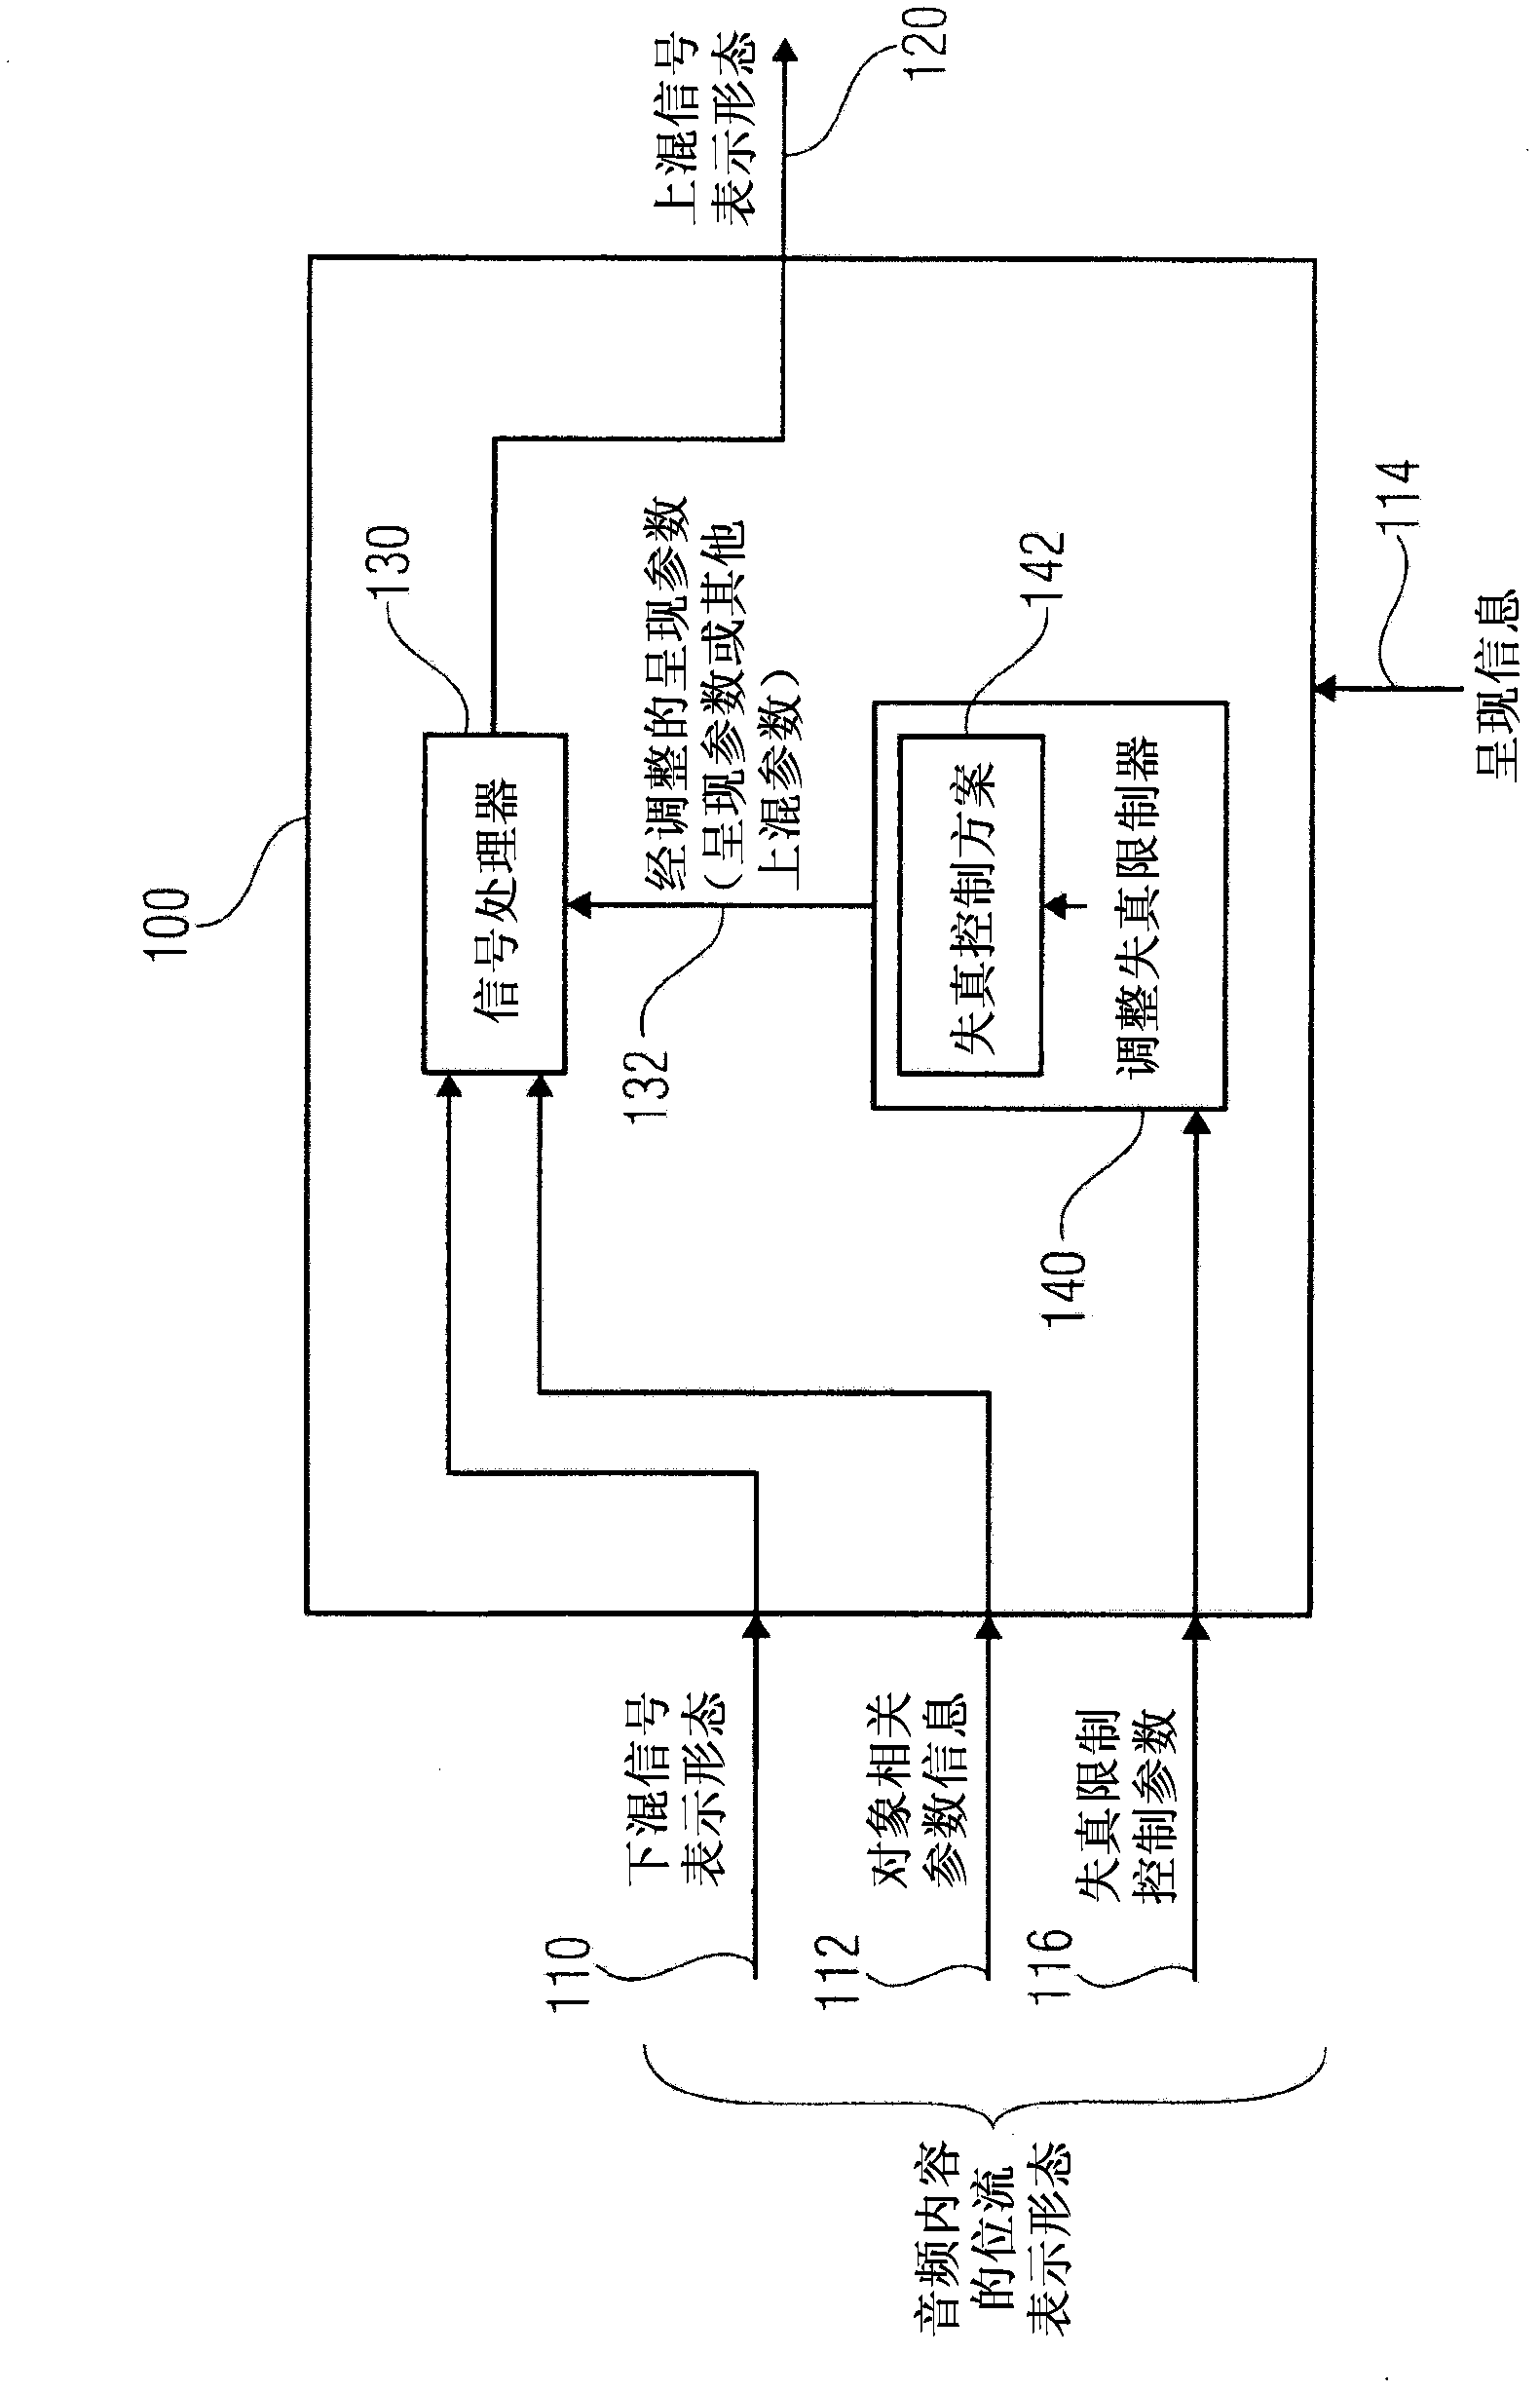 Apparatus for providing an upmix signal representation on the basis of a downmix signal representation, apparatus for providing a bitstream representing a multichannel audio signal, methods, computer program and bitstream using a distortion control signaling